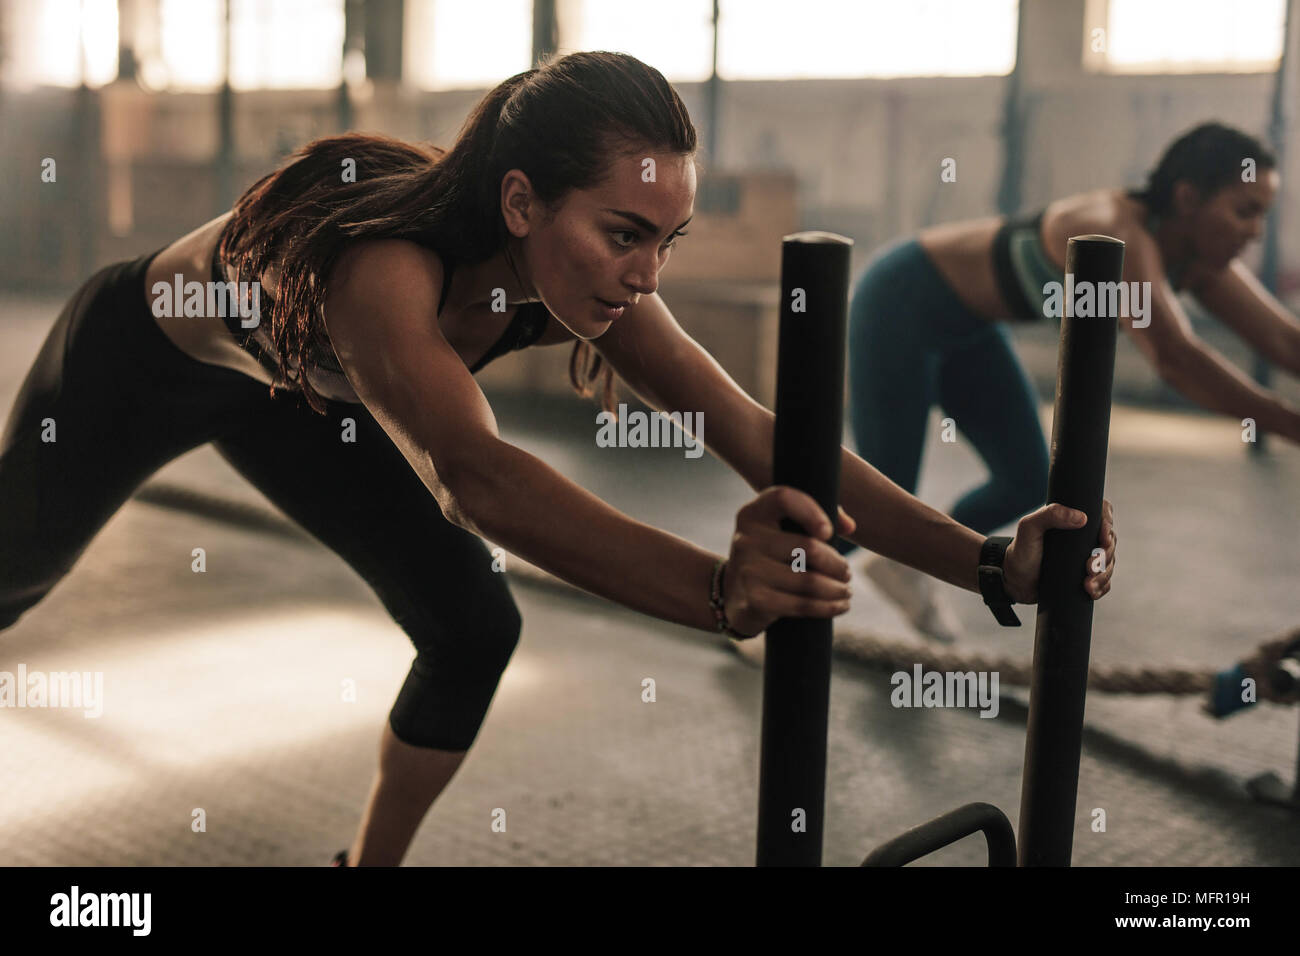 Strong young female pushing the prowler exercise equipment. Fit women exercising at gym. Stock Photo